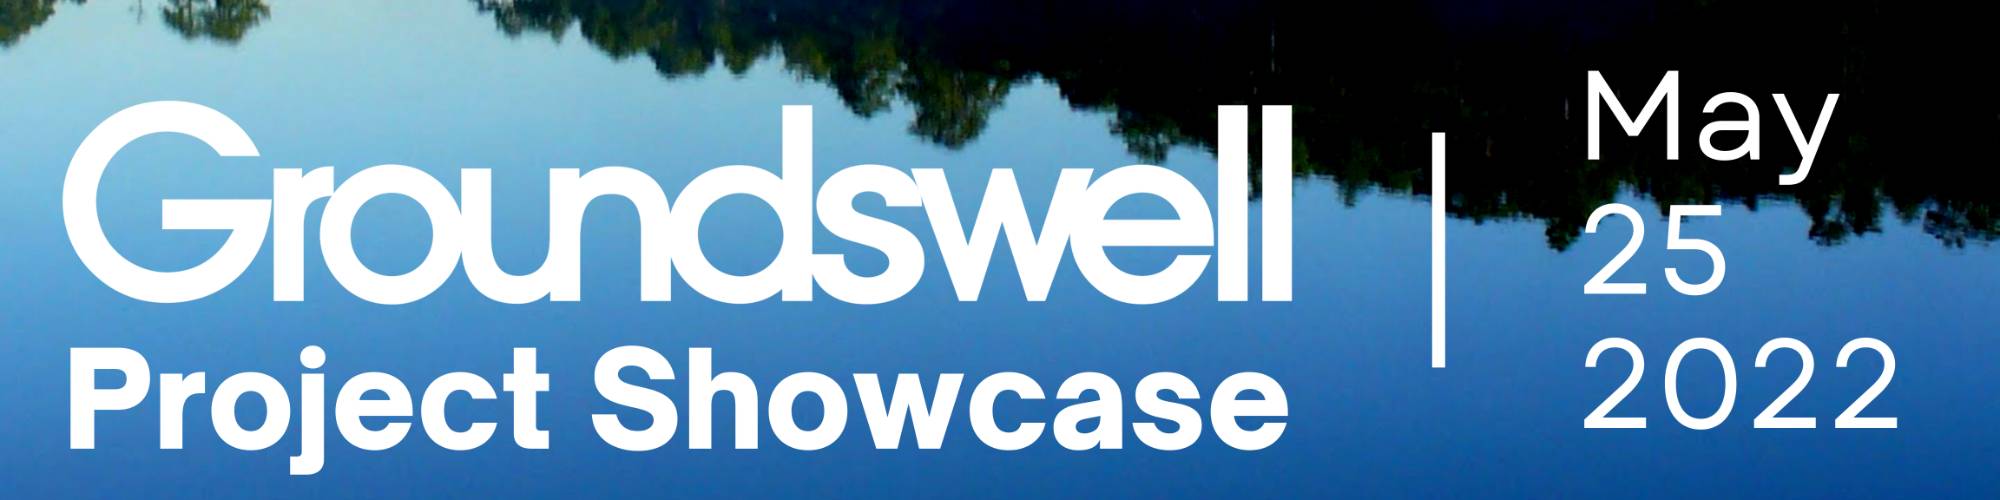 Groundswell showcase announcement banner